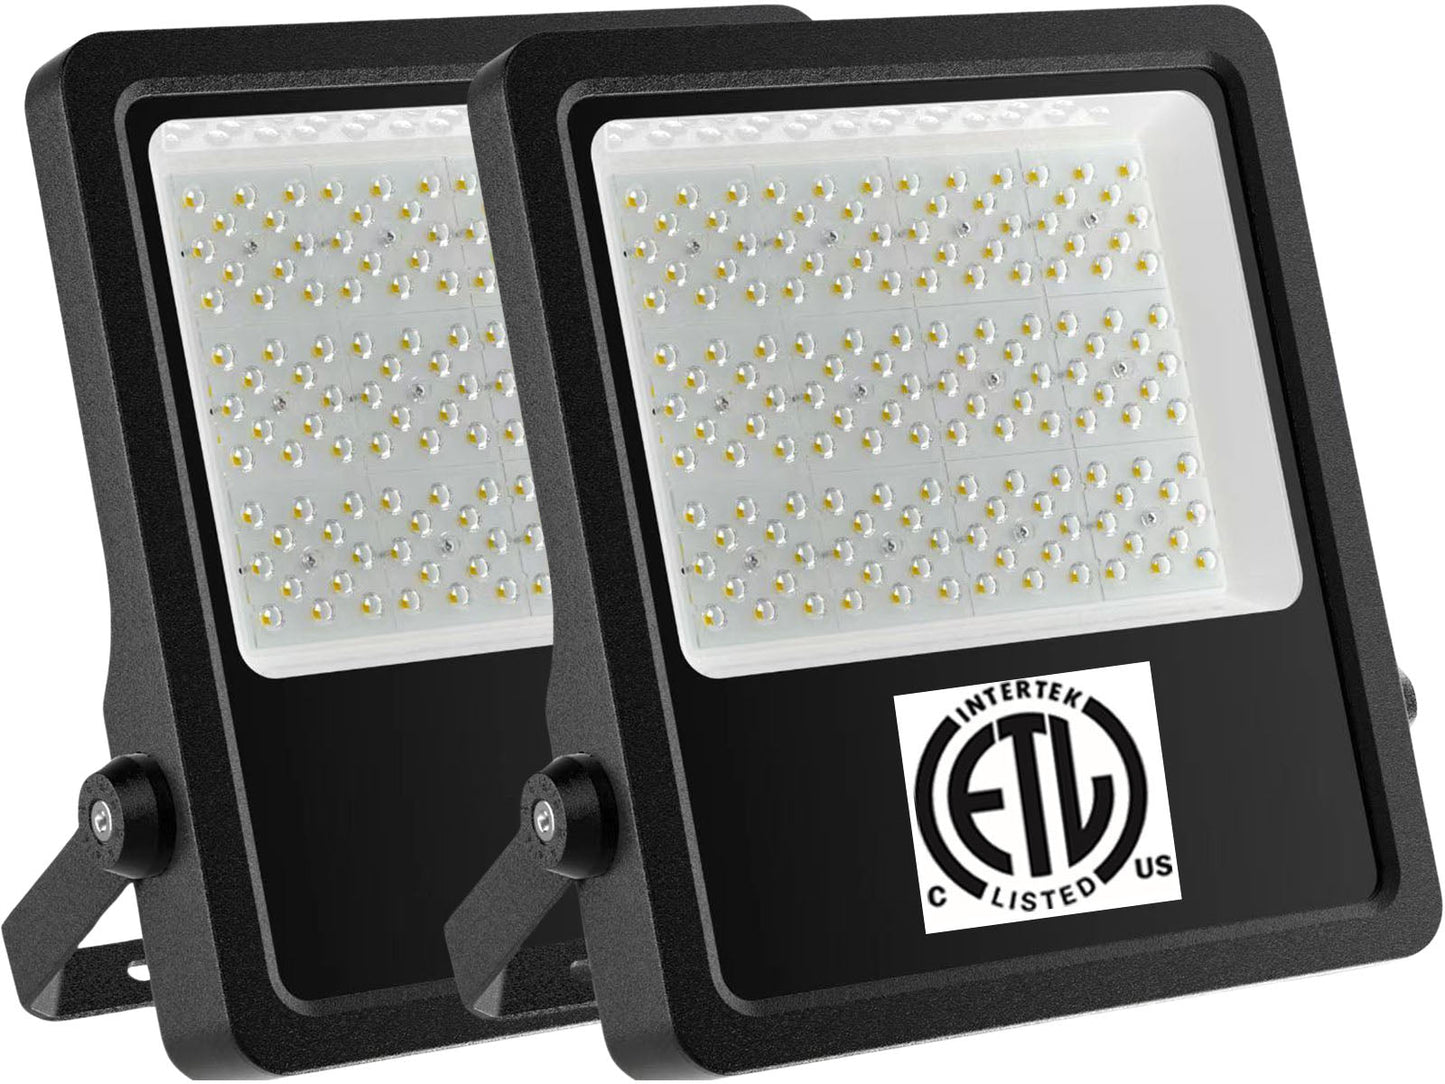 347V 100w Outdoor LED Flood Lights Canada 13000Lm 6500k Bright Photocell